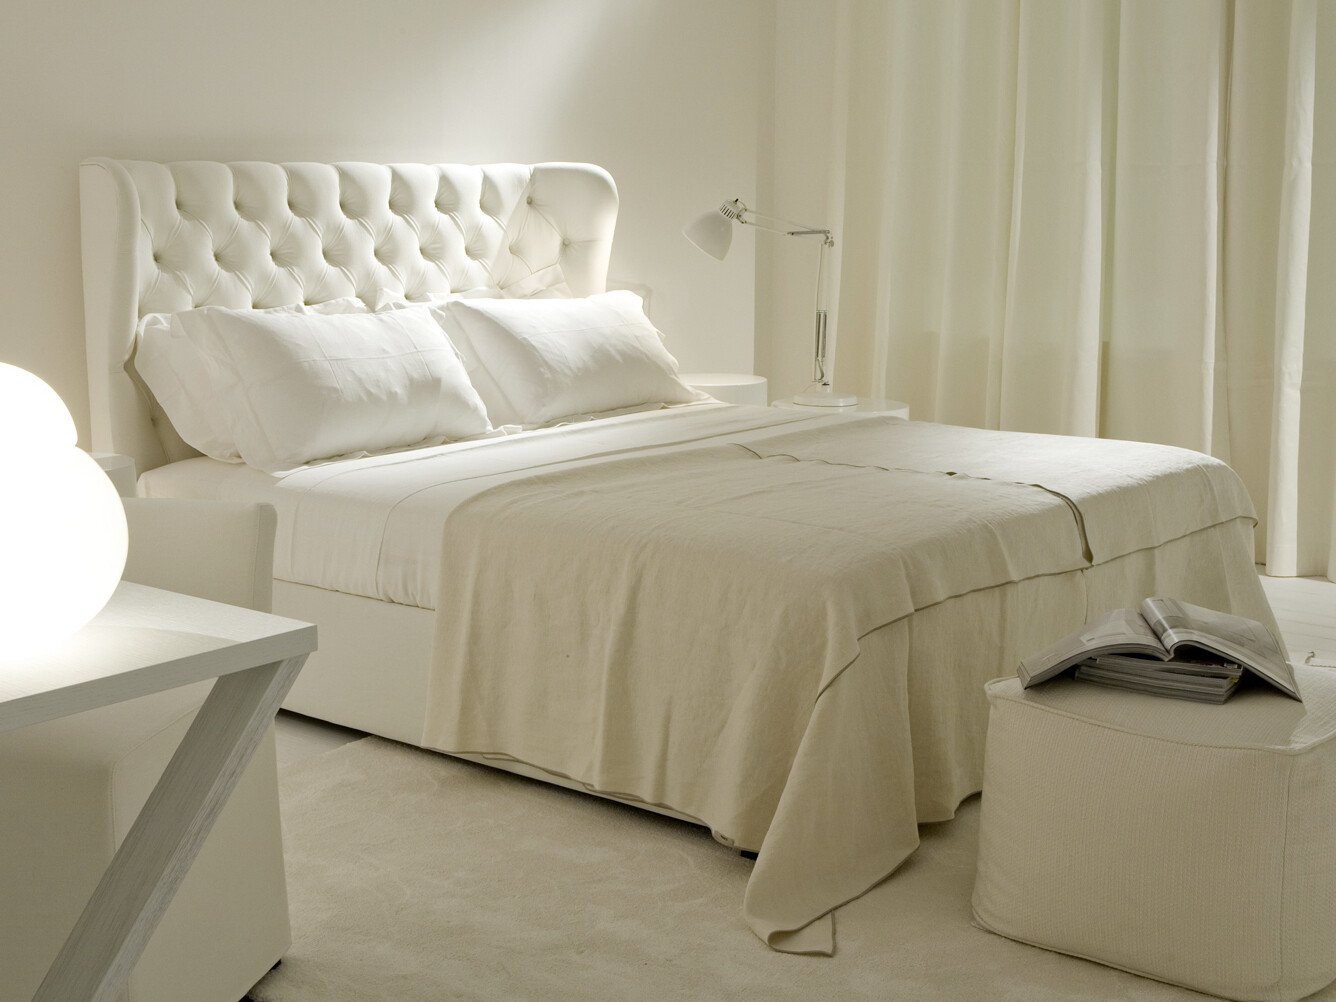 Classical beds reinterpreted with contemporary lines by Meridiani